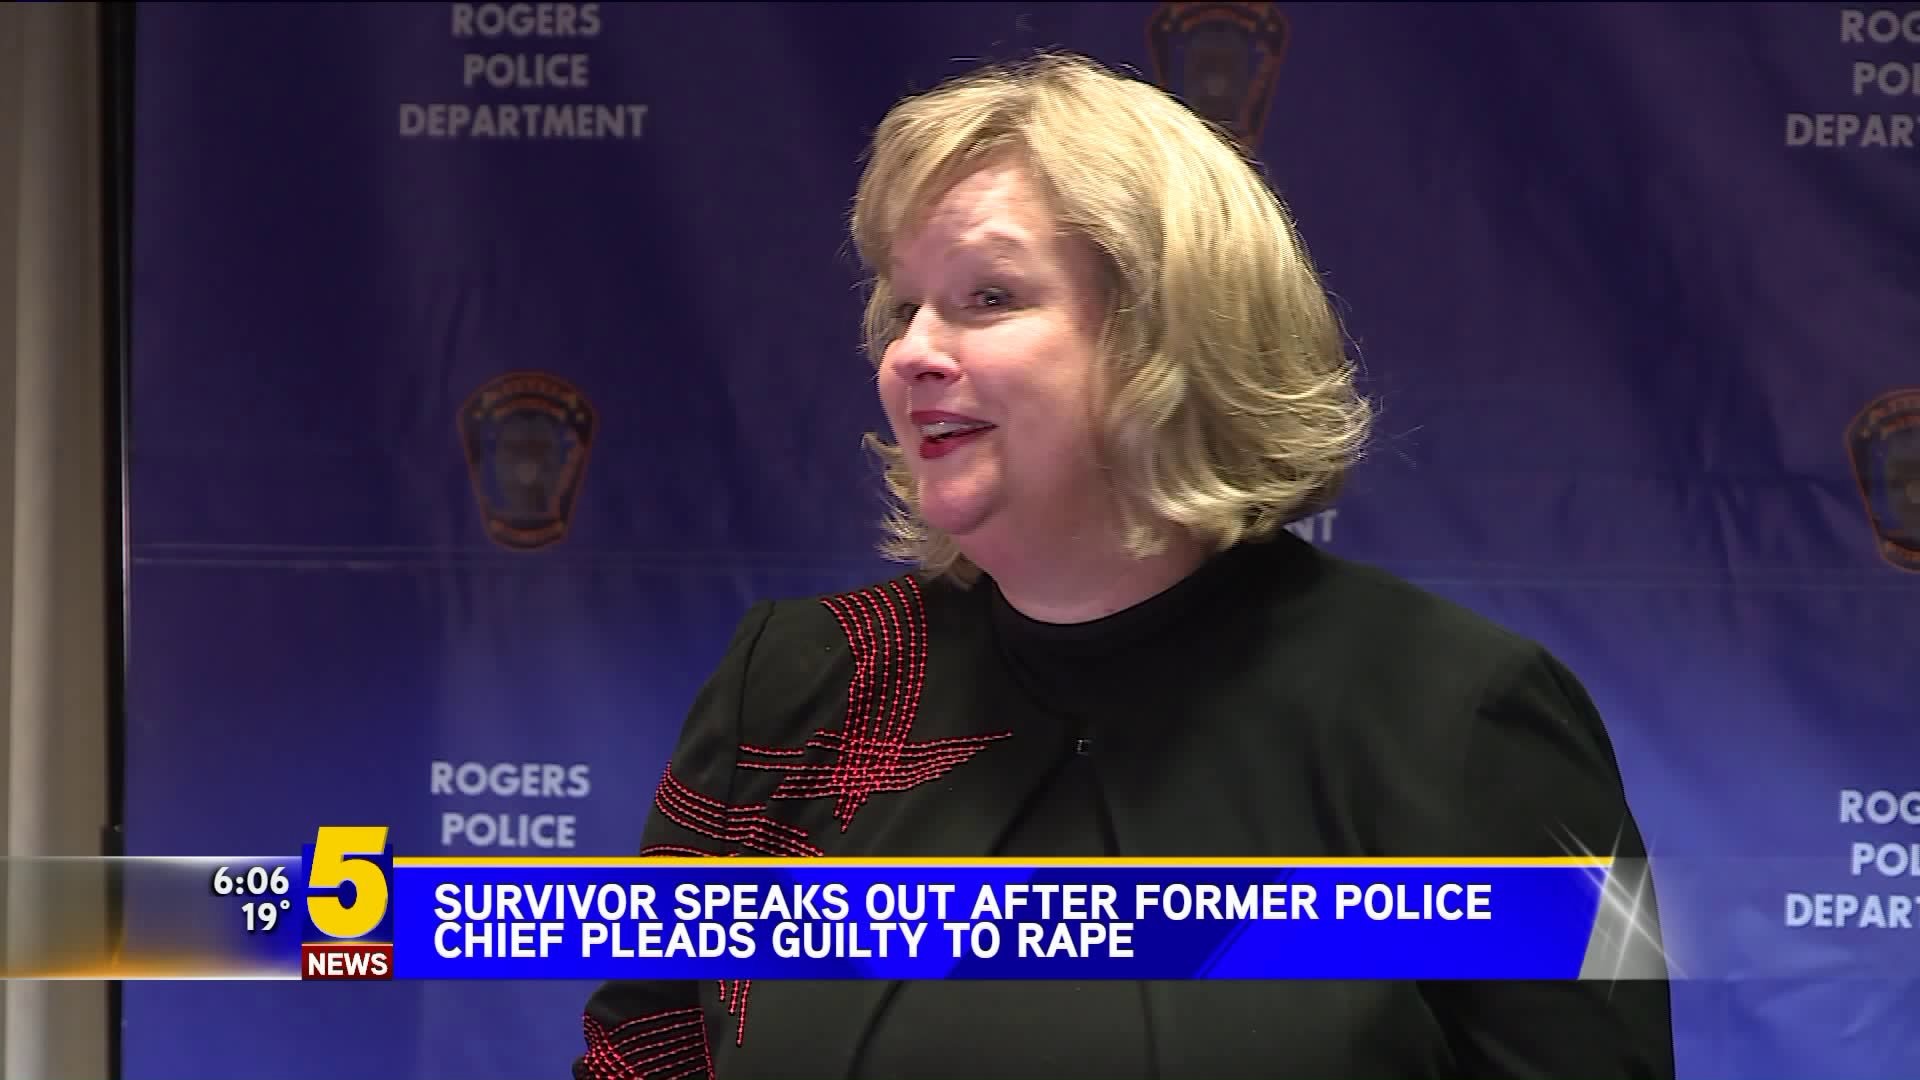 Survivor Speaks Out After Former Police Chief Pleads Guilty To Rape